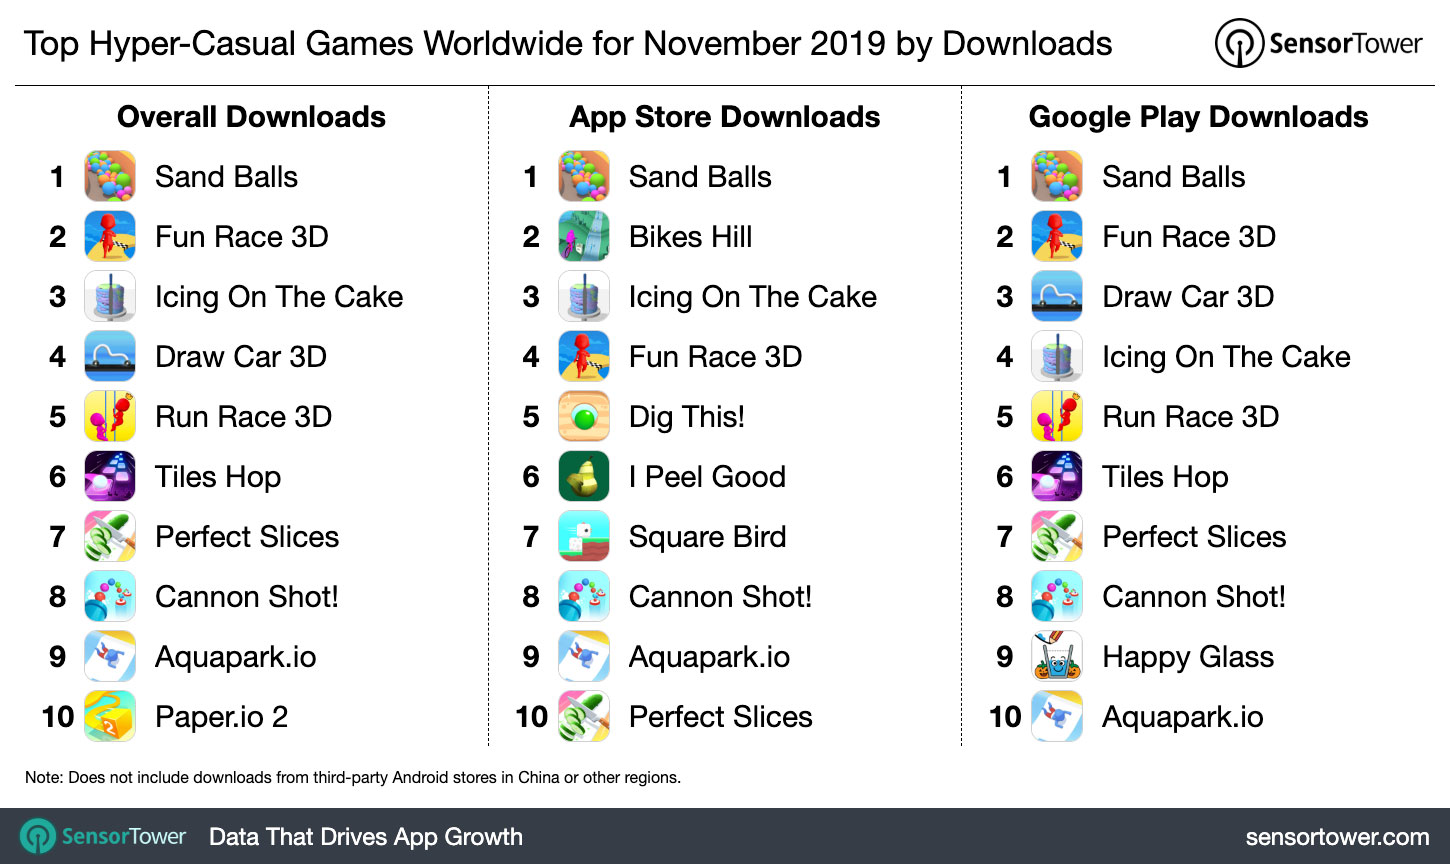 Top Hyper-Casual Games for November Downloads